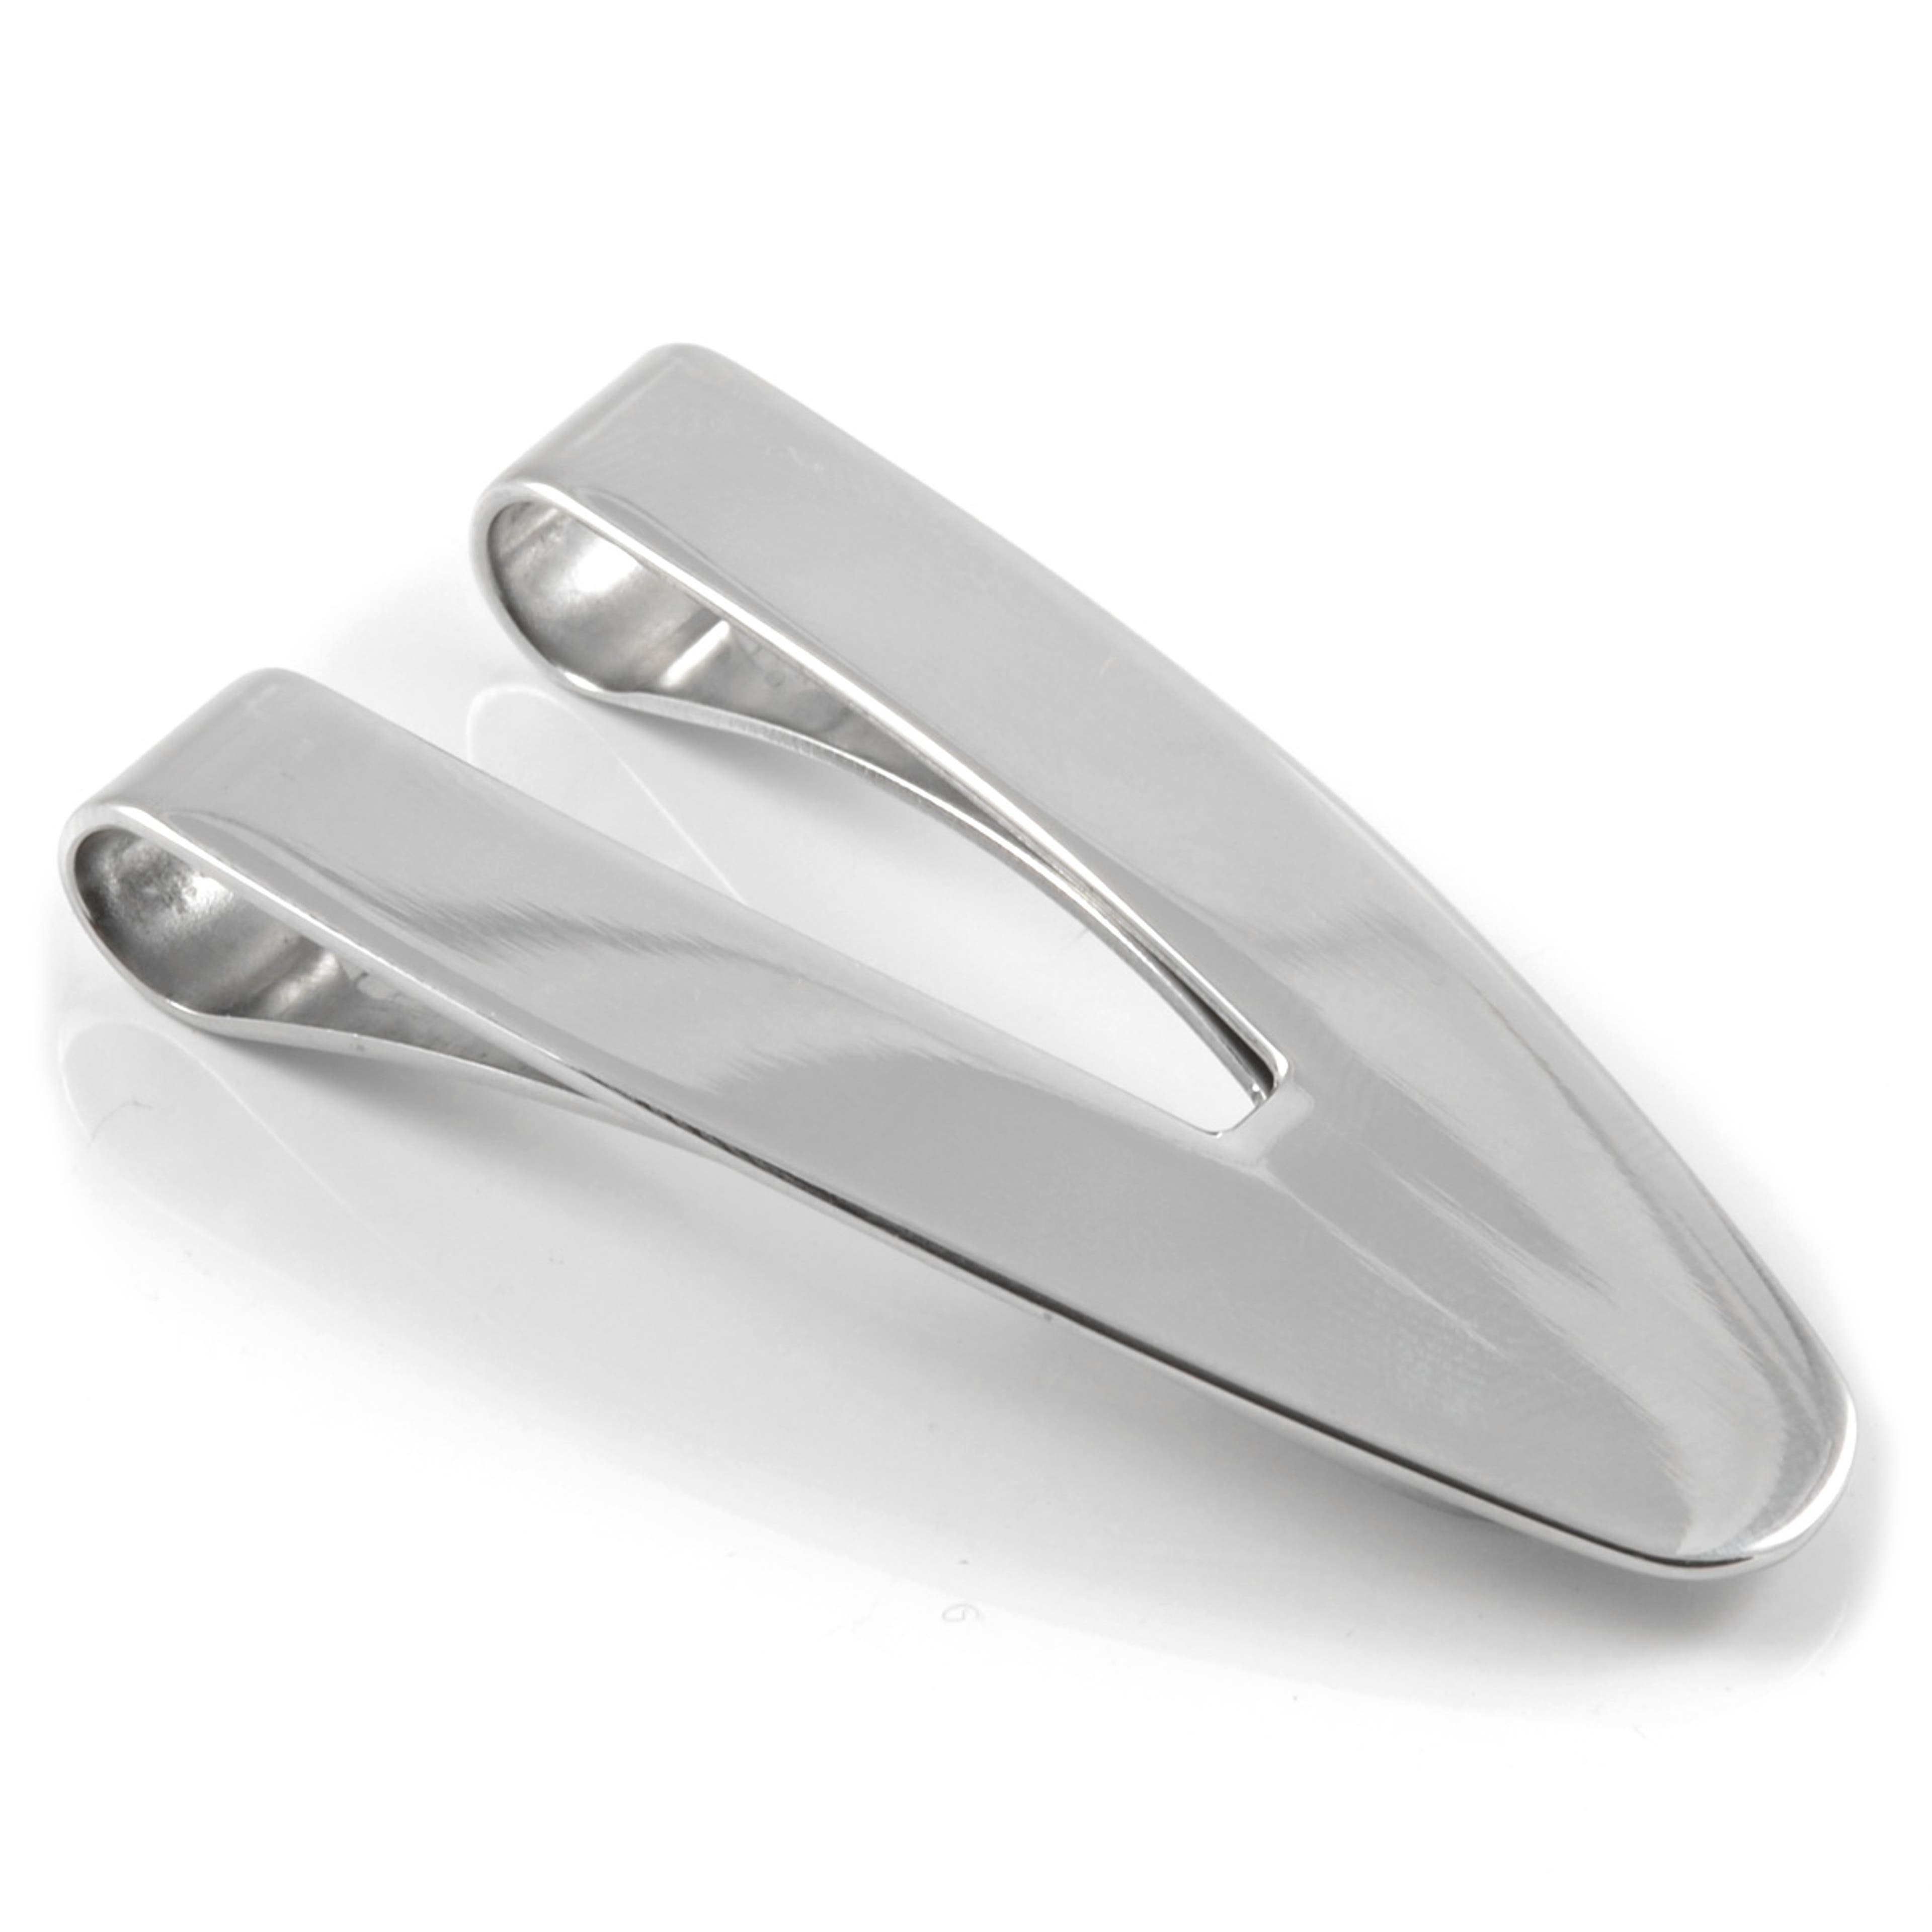 Curved Stainless Steel Money Clip